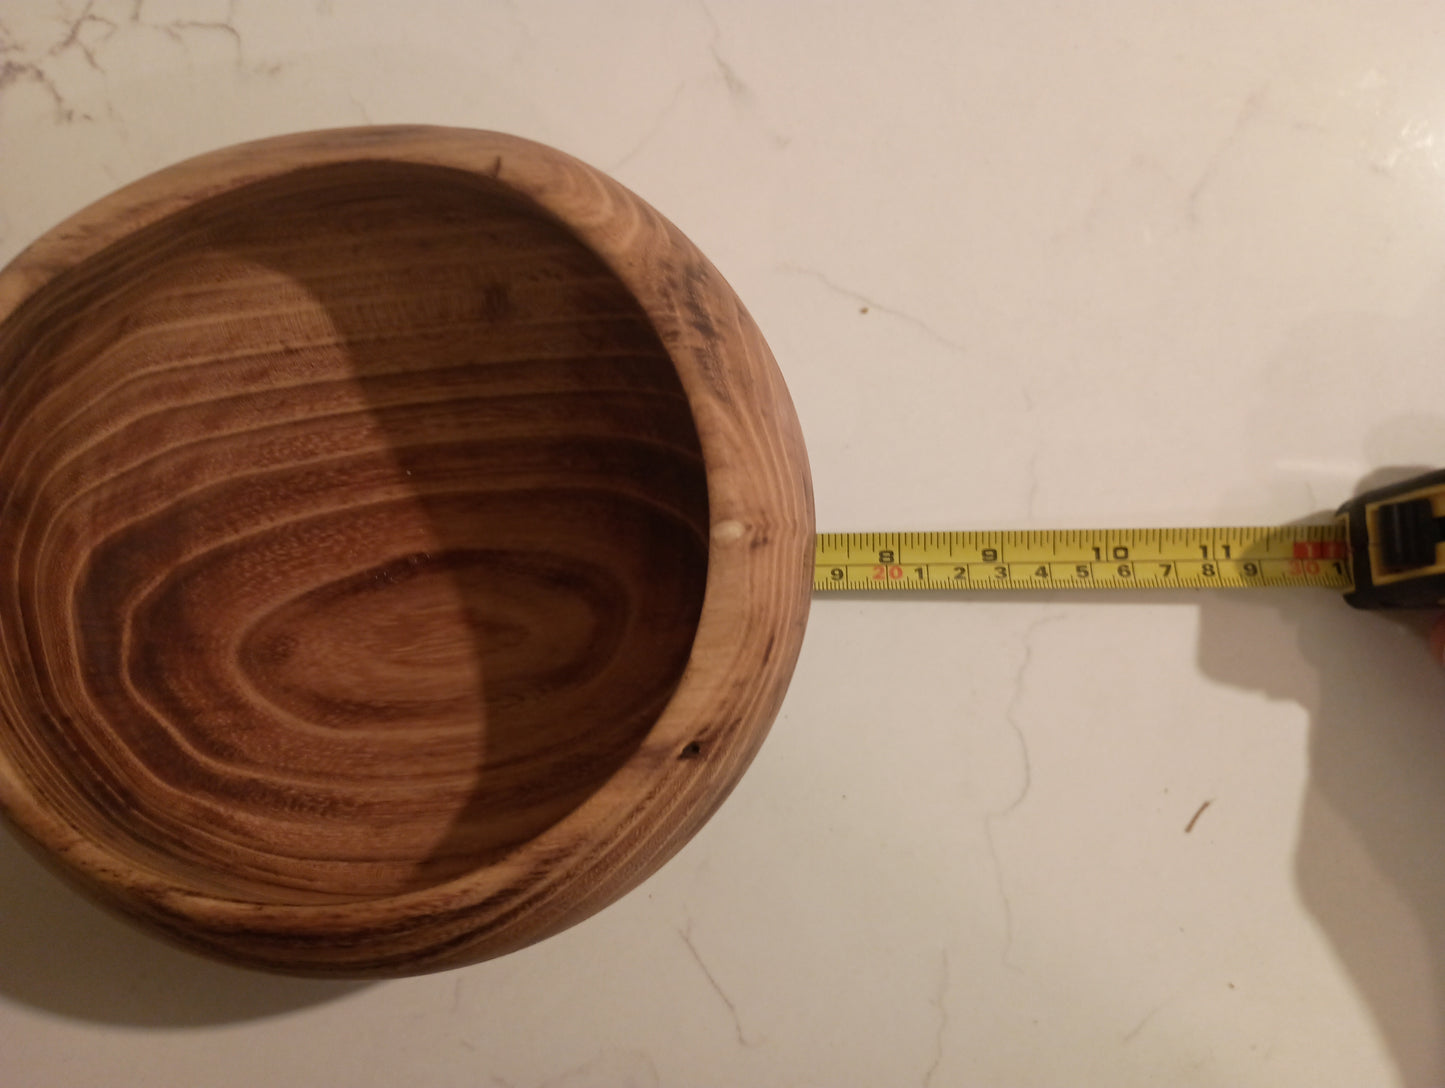 Natural Edge Elm Turned Bowl, roughly 7.25" x 3.5"